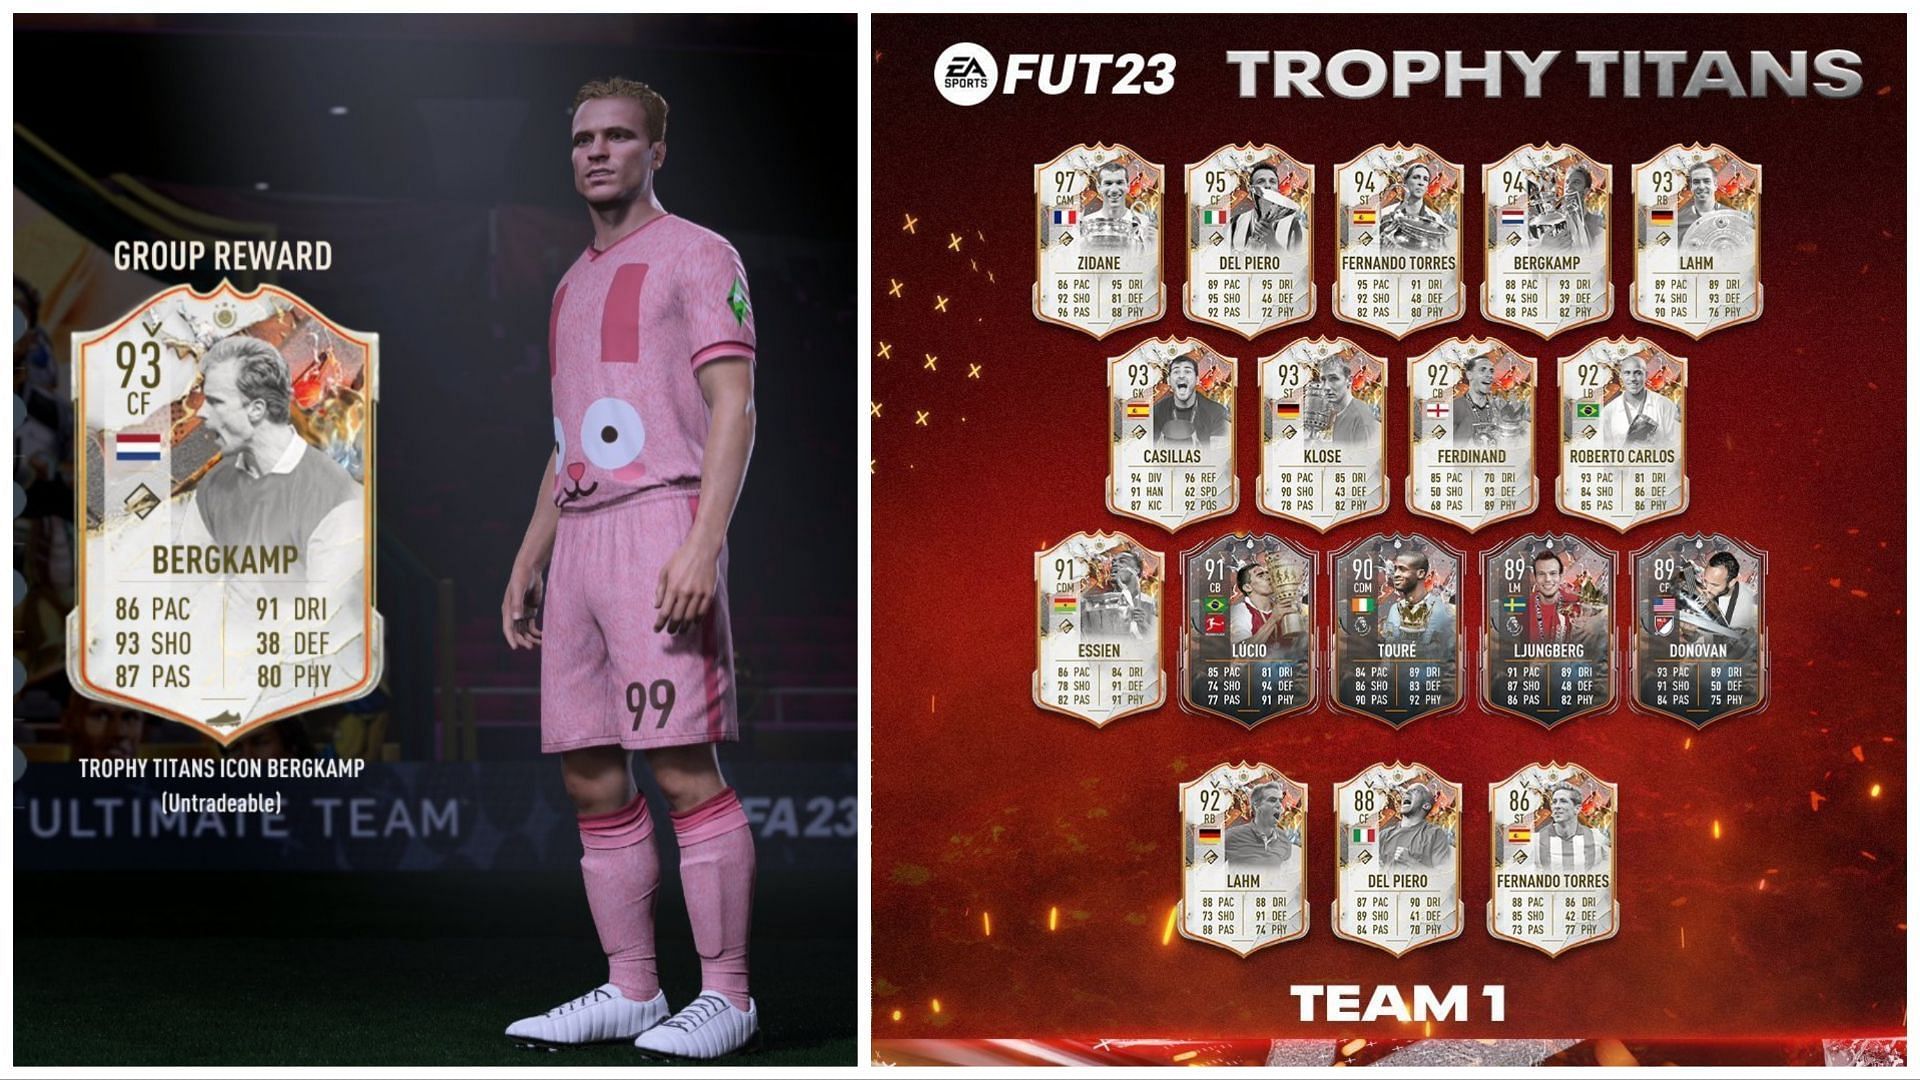 Trophy Titans Bergkamp objective is live in FIFA 23 (Images via EA Sports)